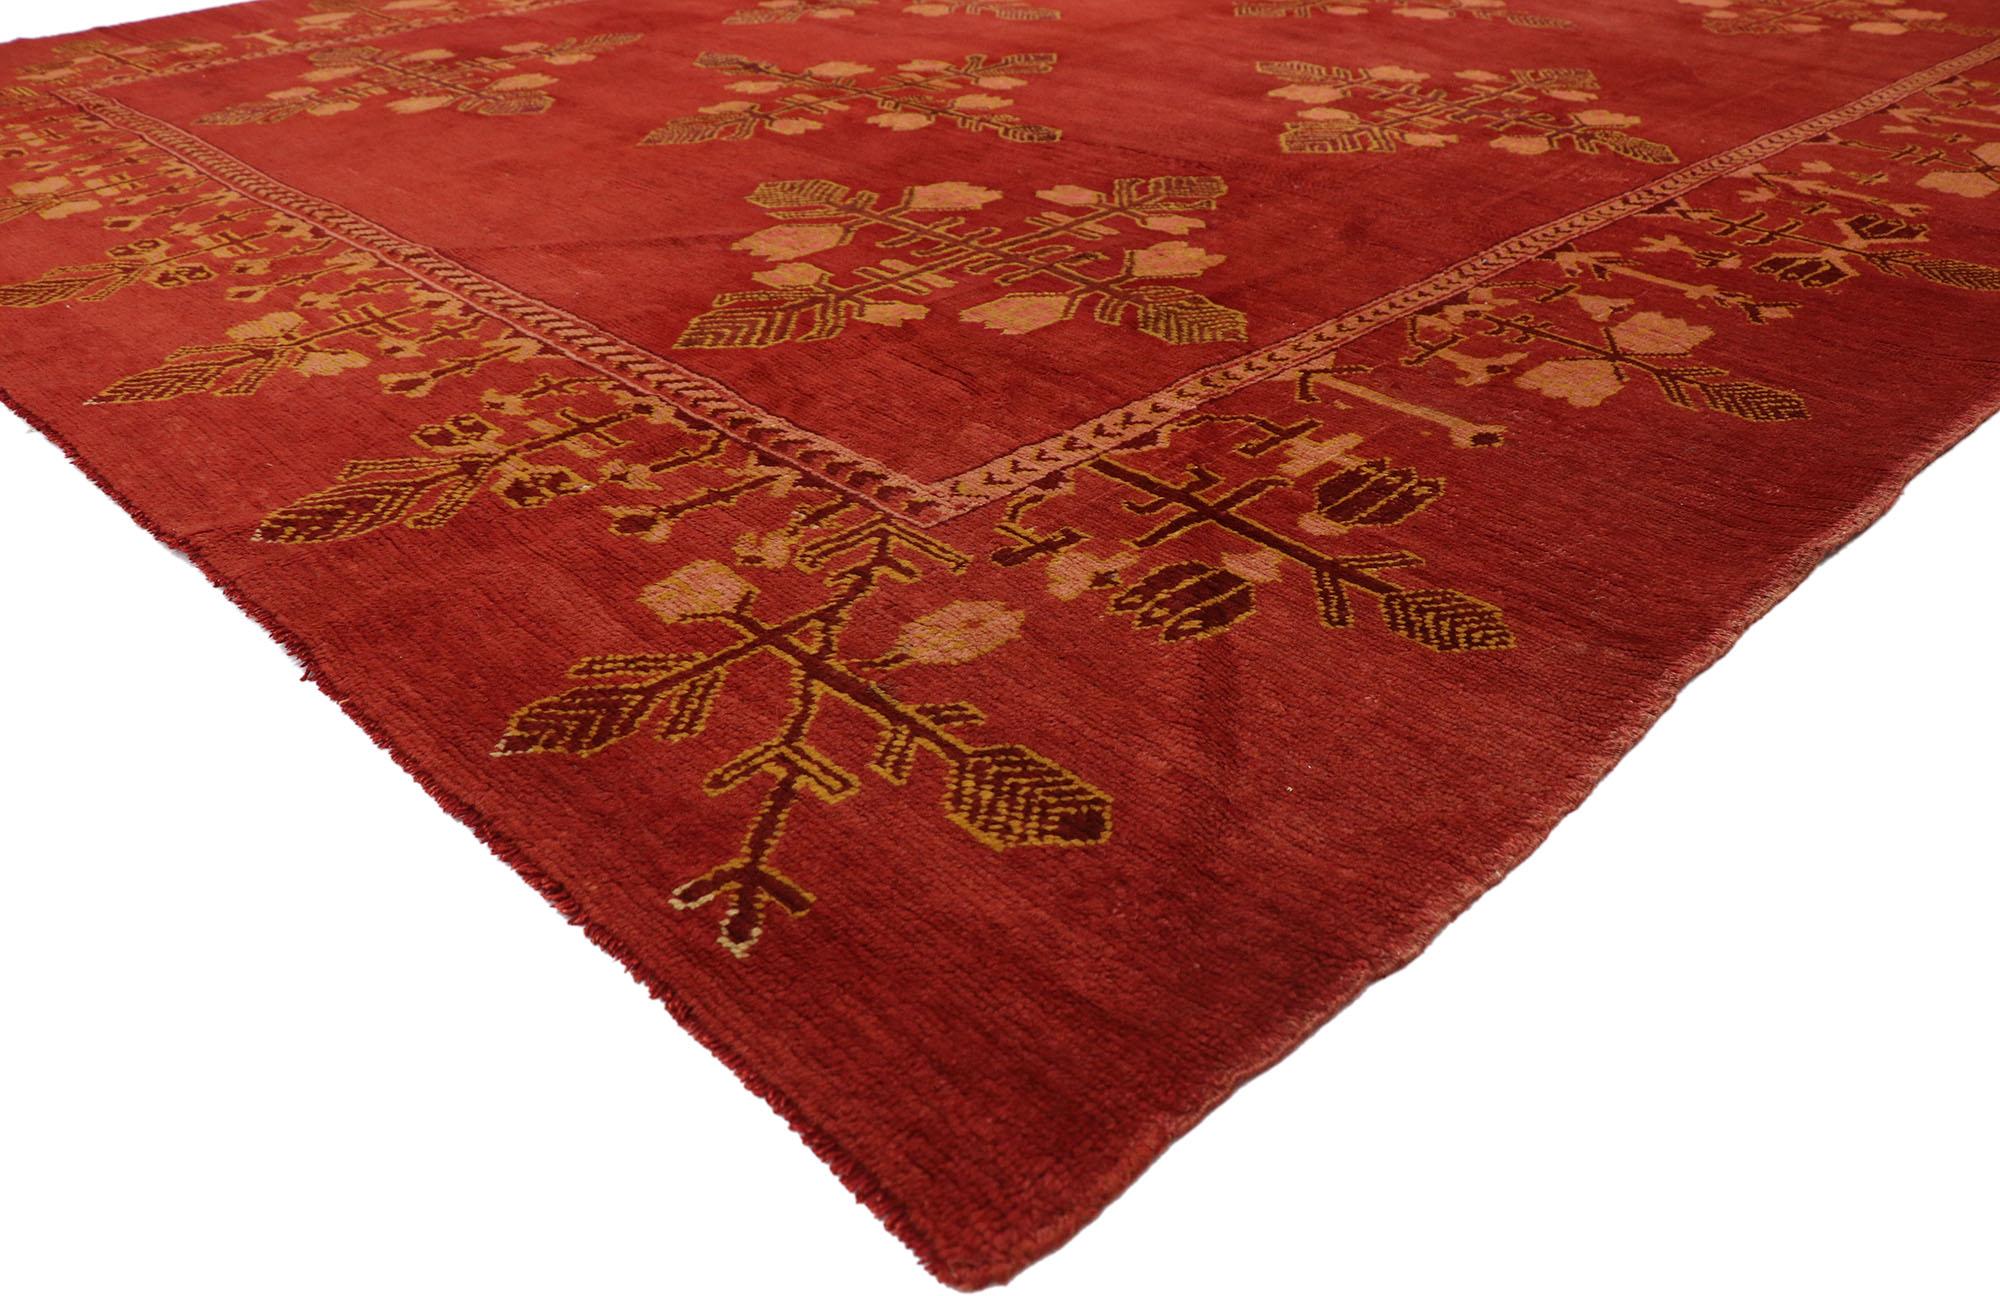 74999 Antique Turkish Oushak rug 10'00 x 12'03. With its timeless elegance and decadent beauty, this hand-knotted wool antique Turkish Oushak rug is poised to impress. It appears like a sumptuous Italian velvet, recalling the rich and luxurious